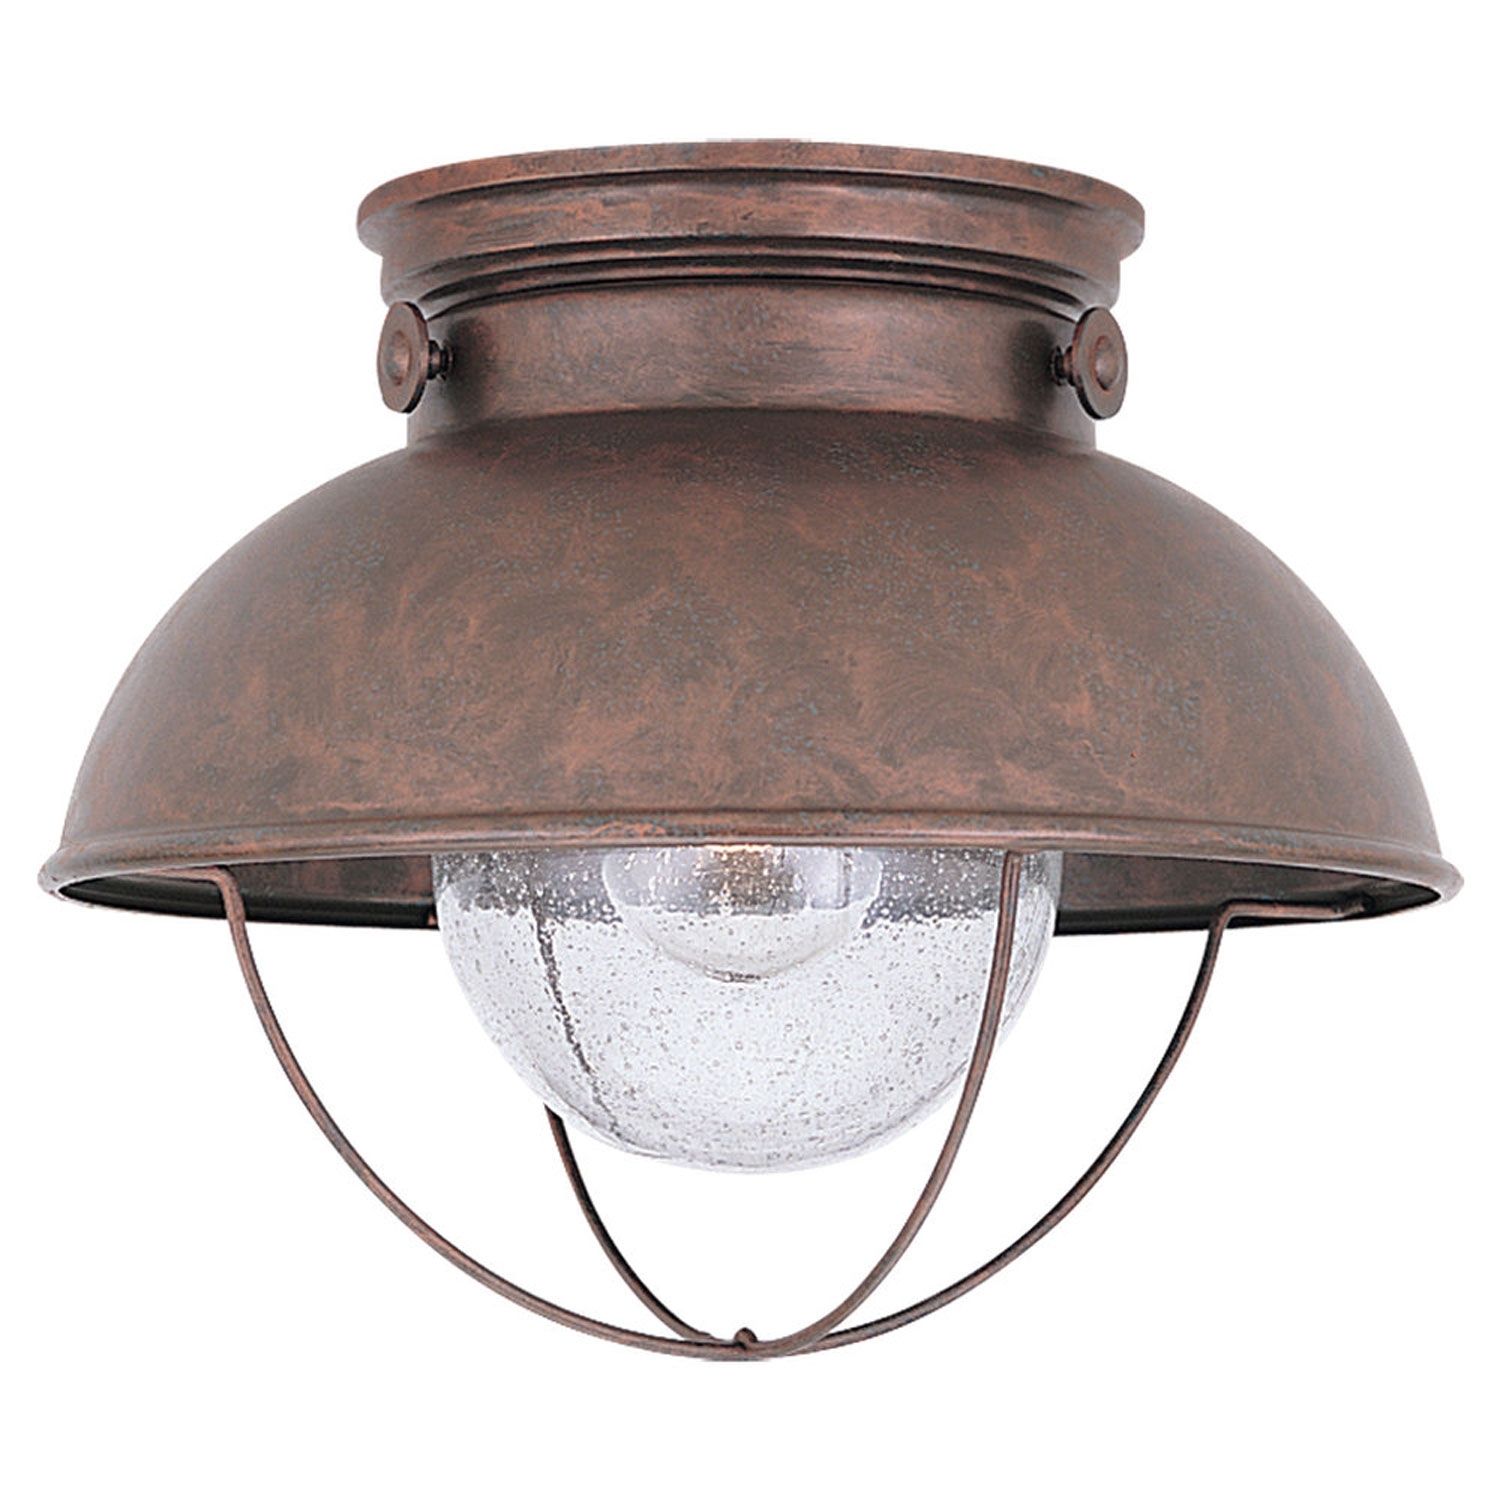 Ceiling Fan: Ceiling Light Fixture Astonishing Roundlbl Lighting Intended For Vintage Outdoor Ceiling Lights (View 6 of 15)